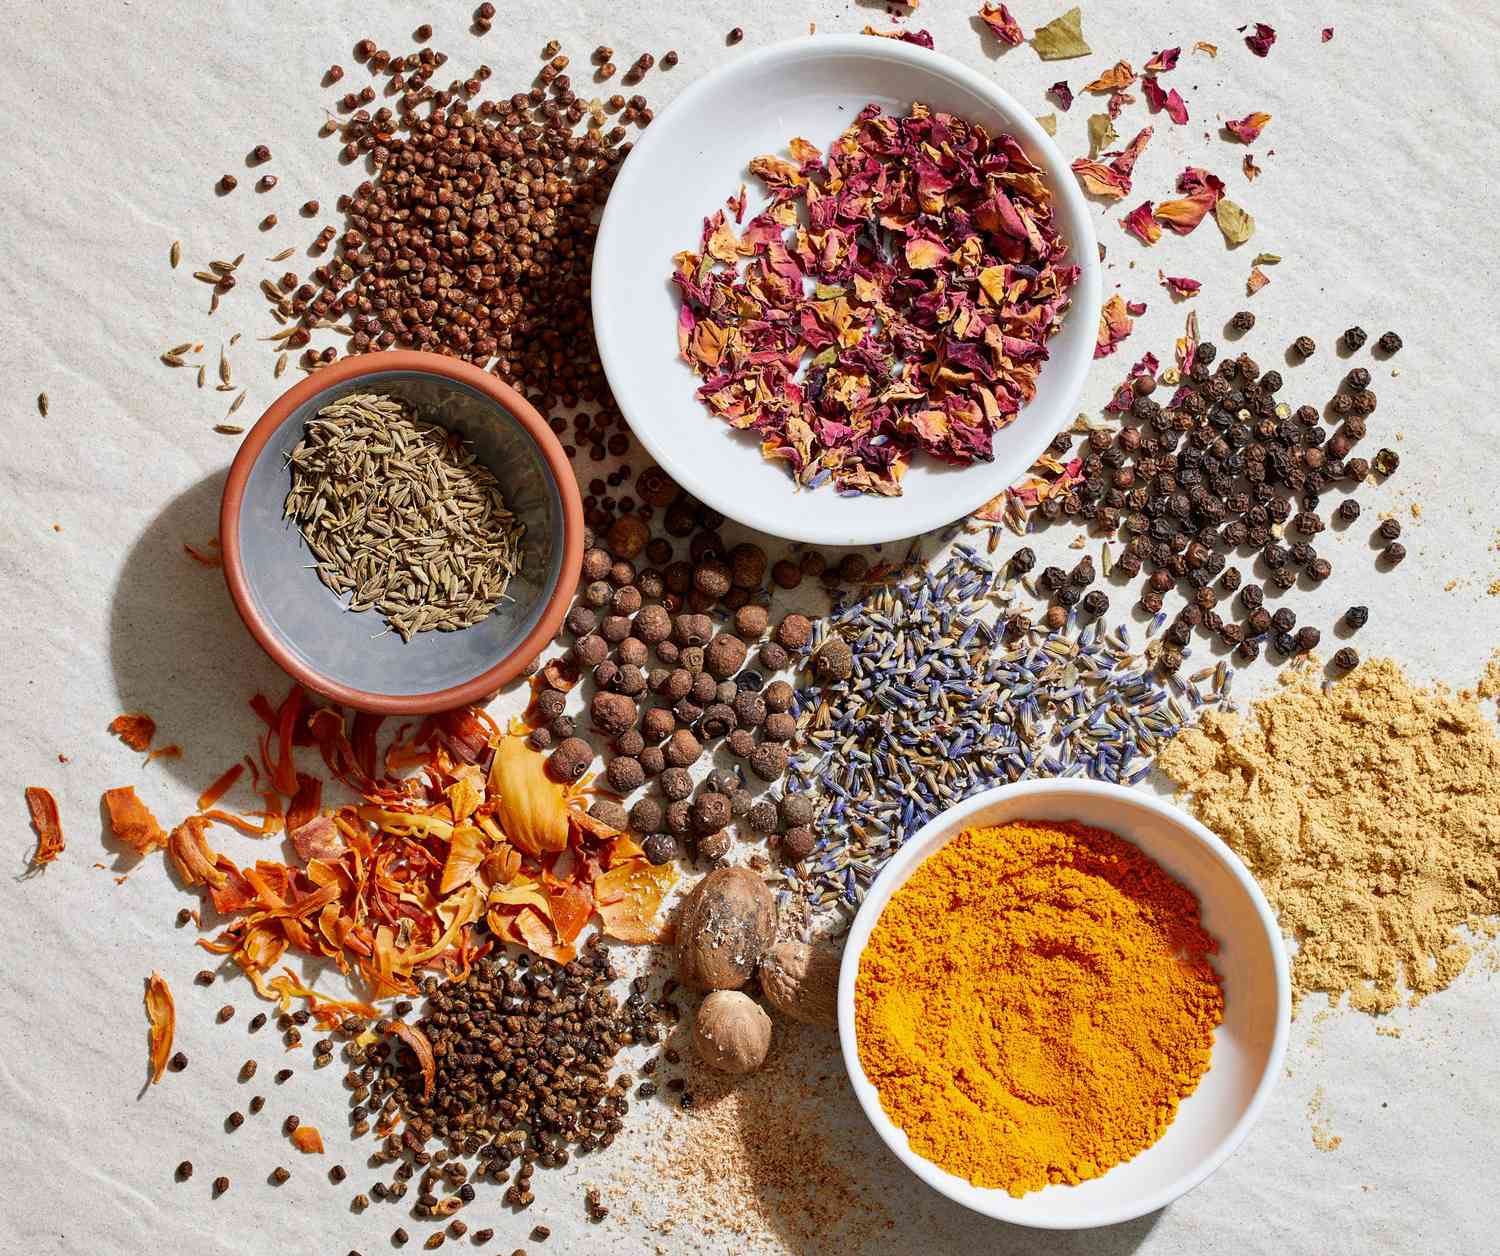 Curry and spice blend in bowls